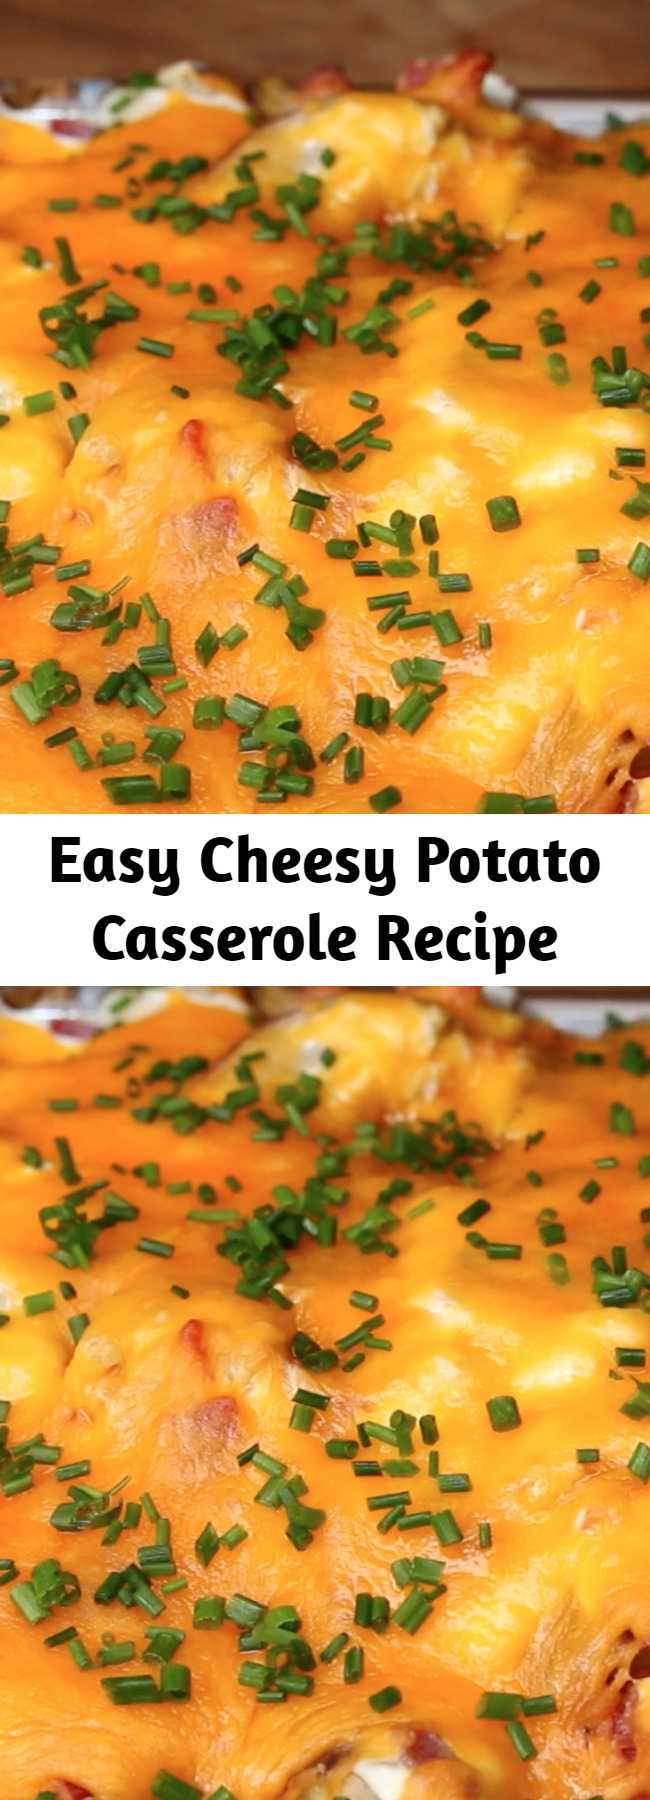 Easy Cheesy Potato Casserole Recipe - This cheesy potato casserole is the perfect way to feed a family of picky eaters. With all of the components of beloved loaded potato skins (like bacon, sour cream, and cheese), it’s practically impossible for anyone to dislike this casserole. It’s make-ahead friendly, filling, and easily made vegetarian by omitting the bacon. If you’re looking for the ultimate weeknight casserole, this is your recipe.